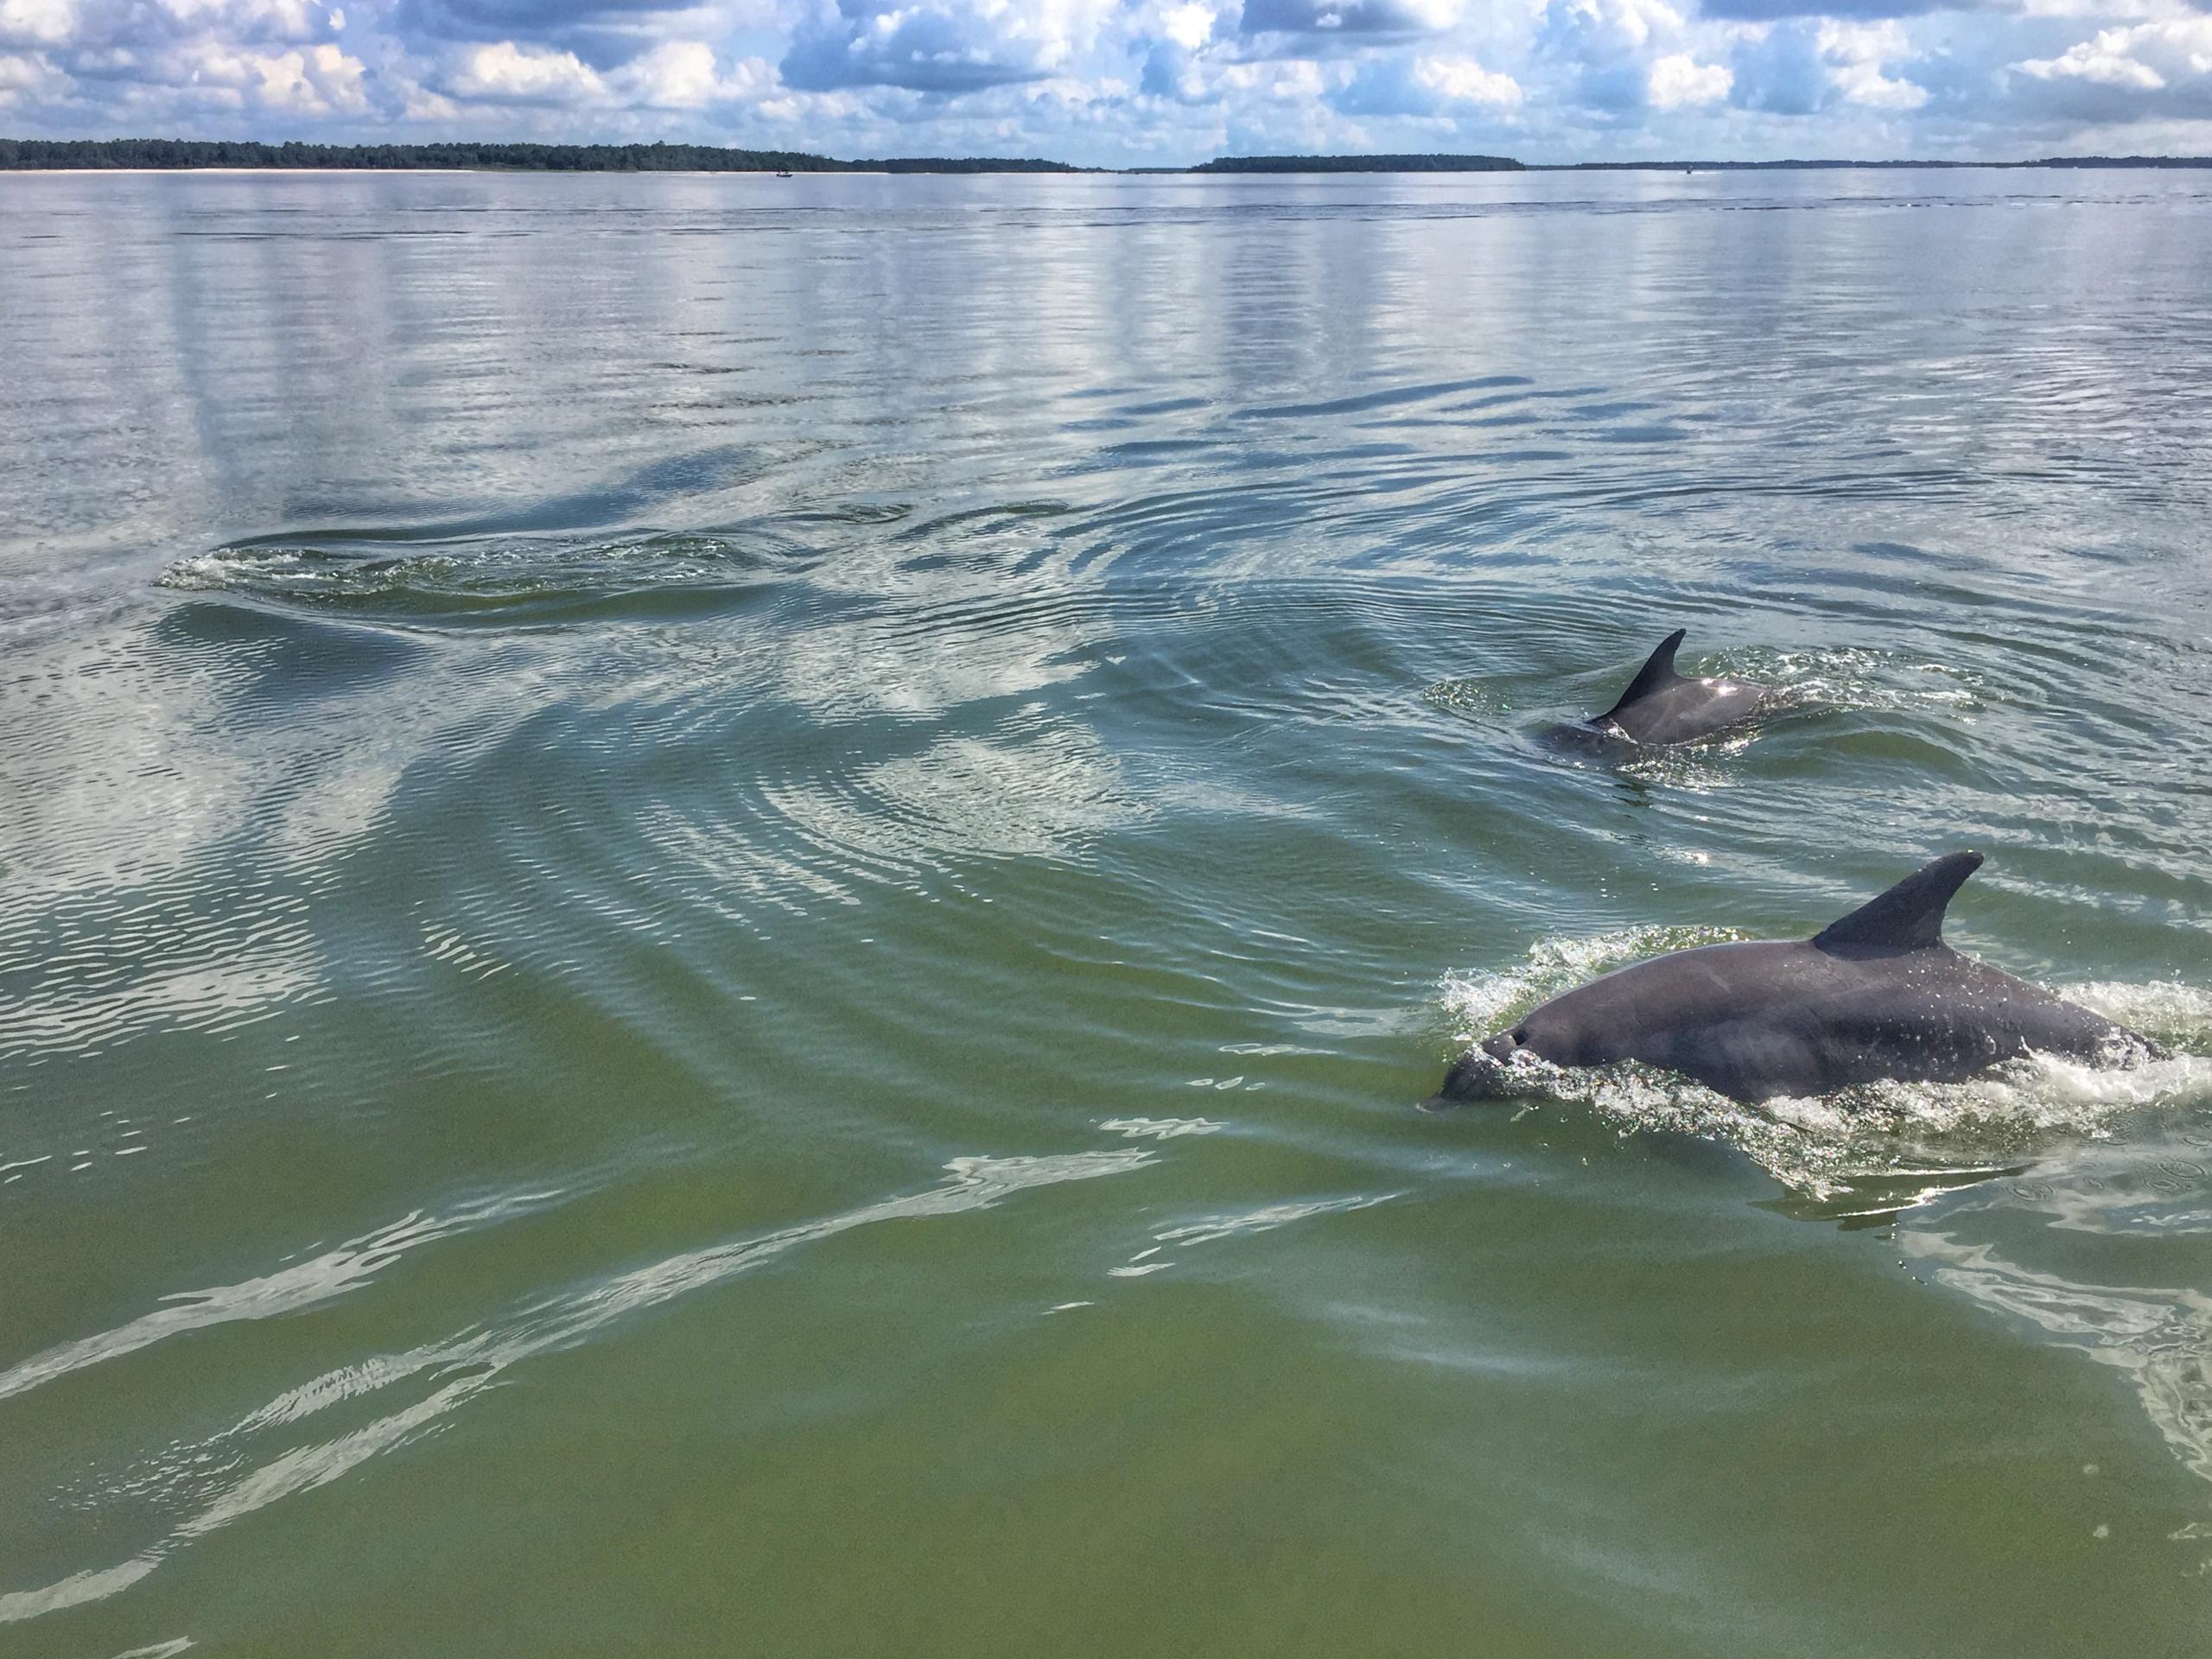 Dolphins & Donuts Tour in Hilton Head